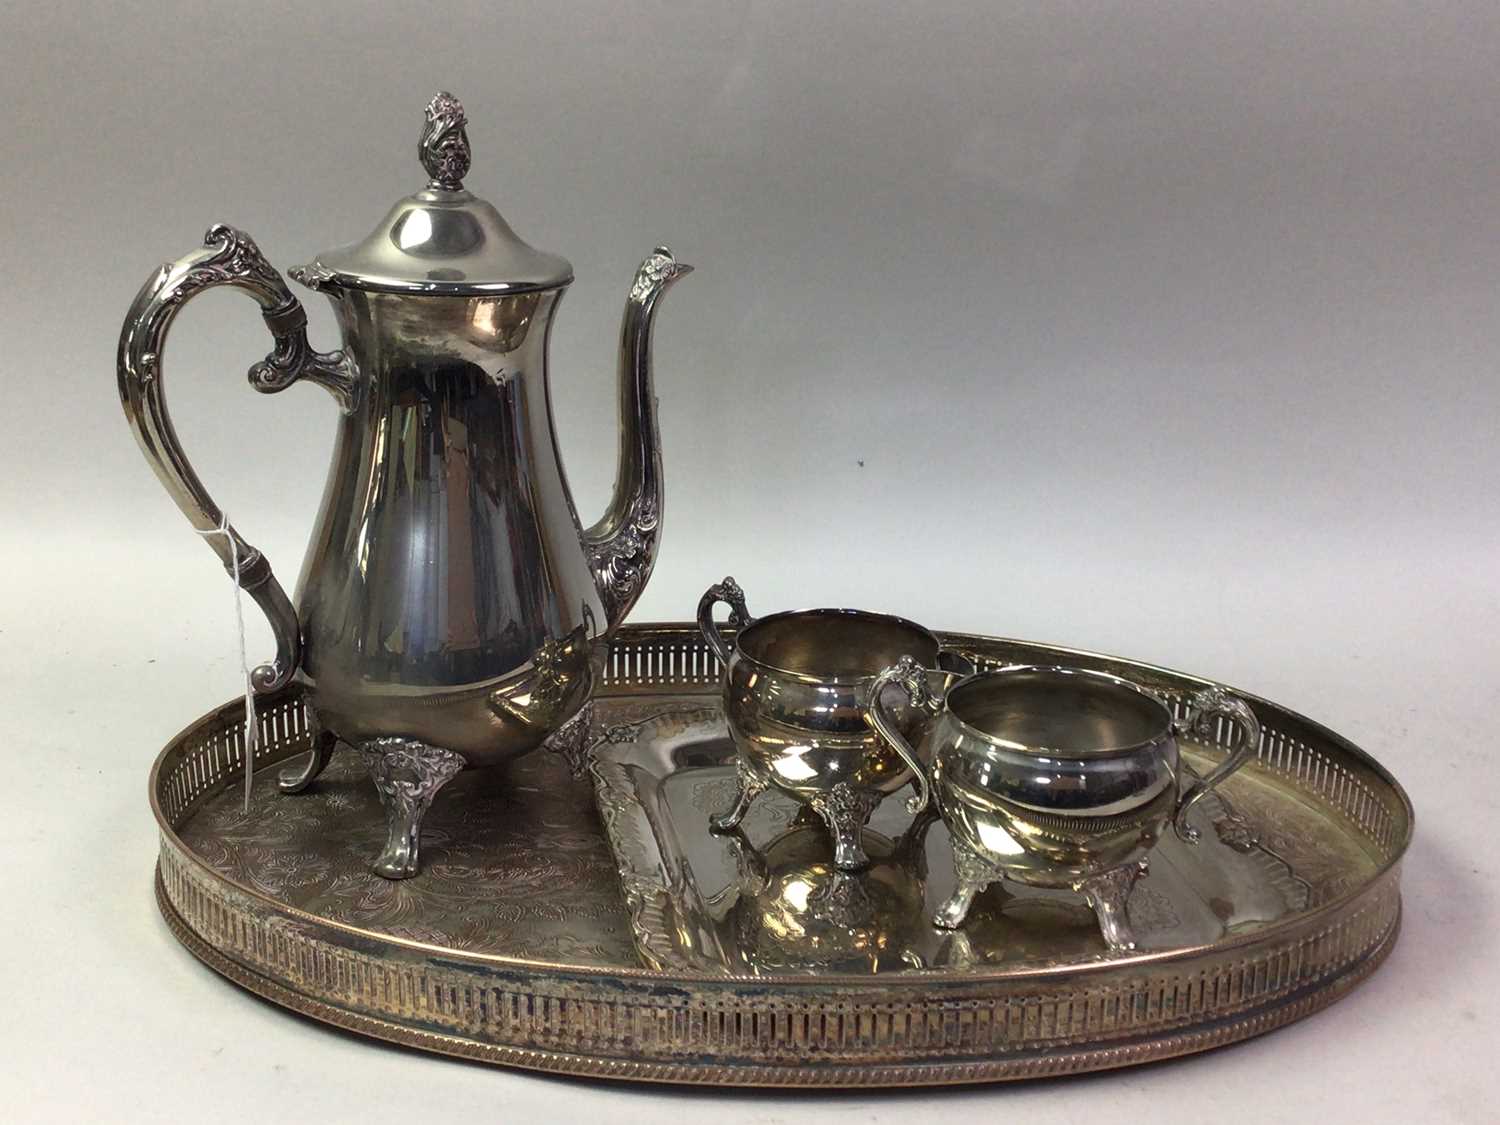 FOUR PIECE SILVER PLATED TEA SERVICE, ALONG WITH TWO SILVER PLATED TRAYS - Image 2 of 2